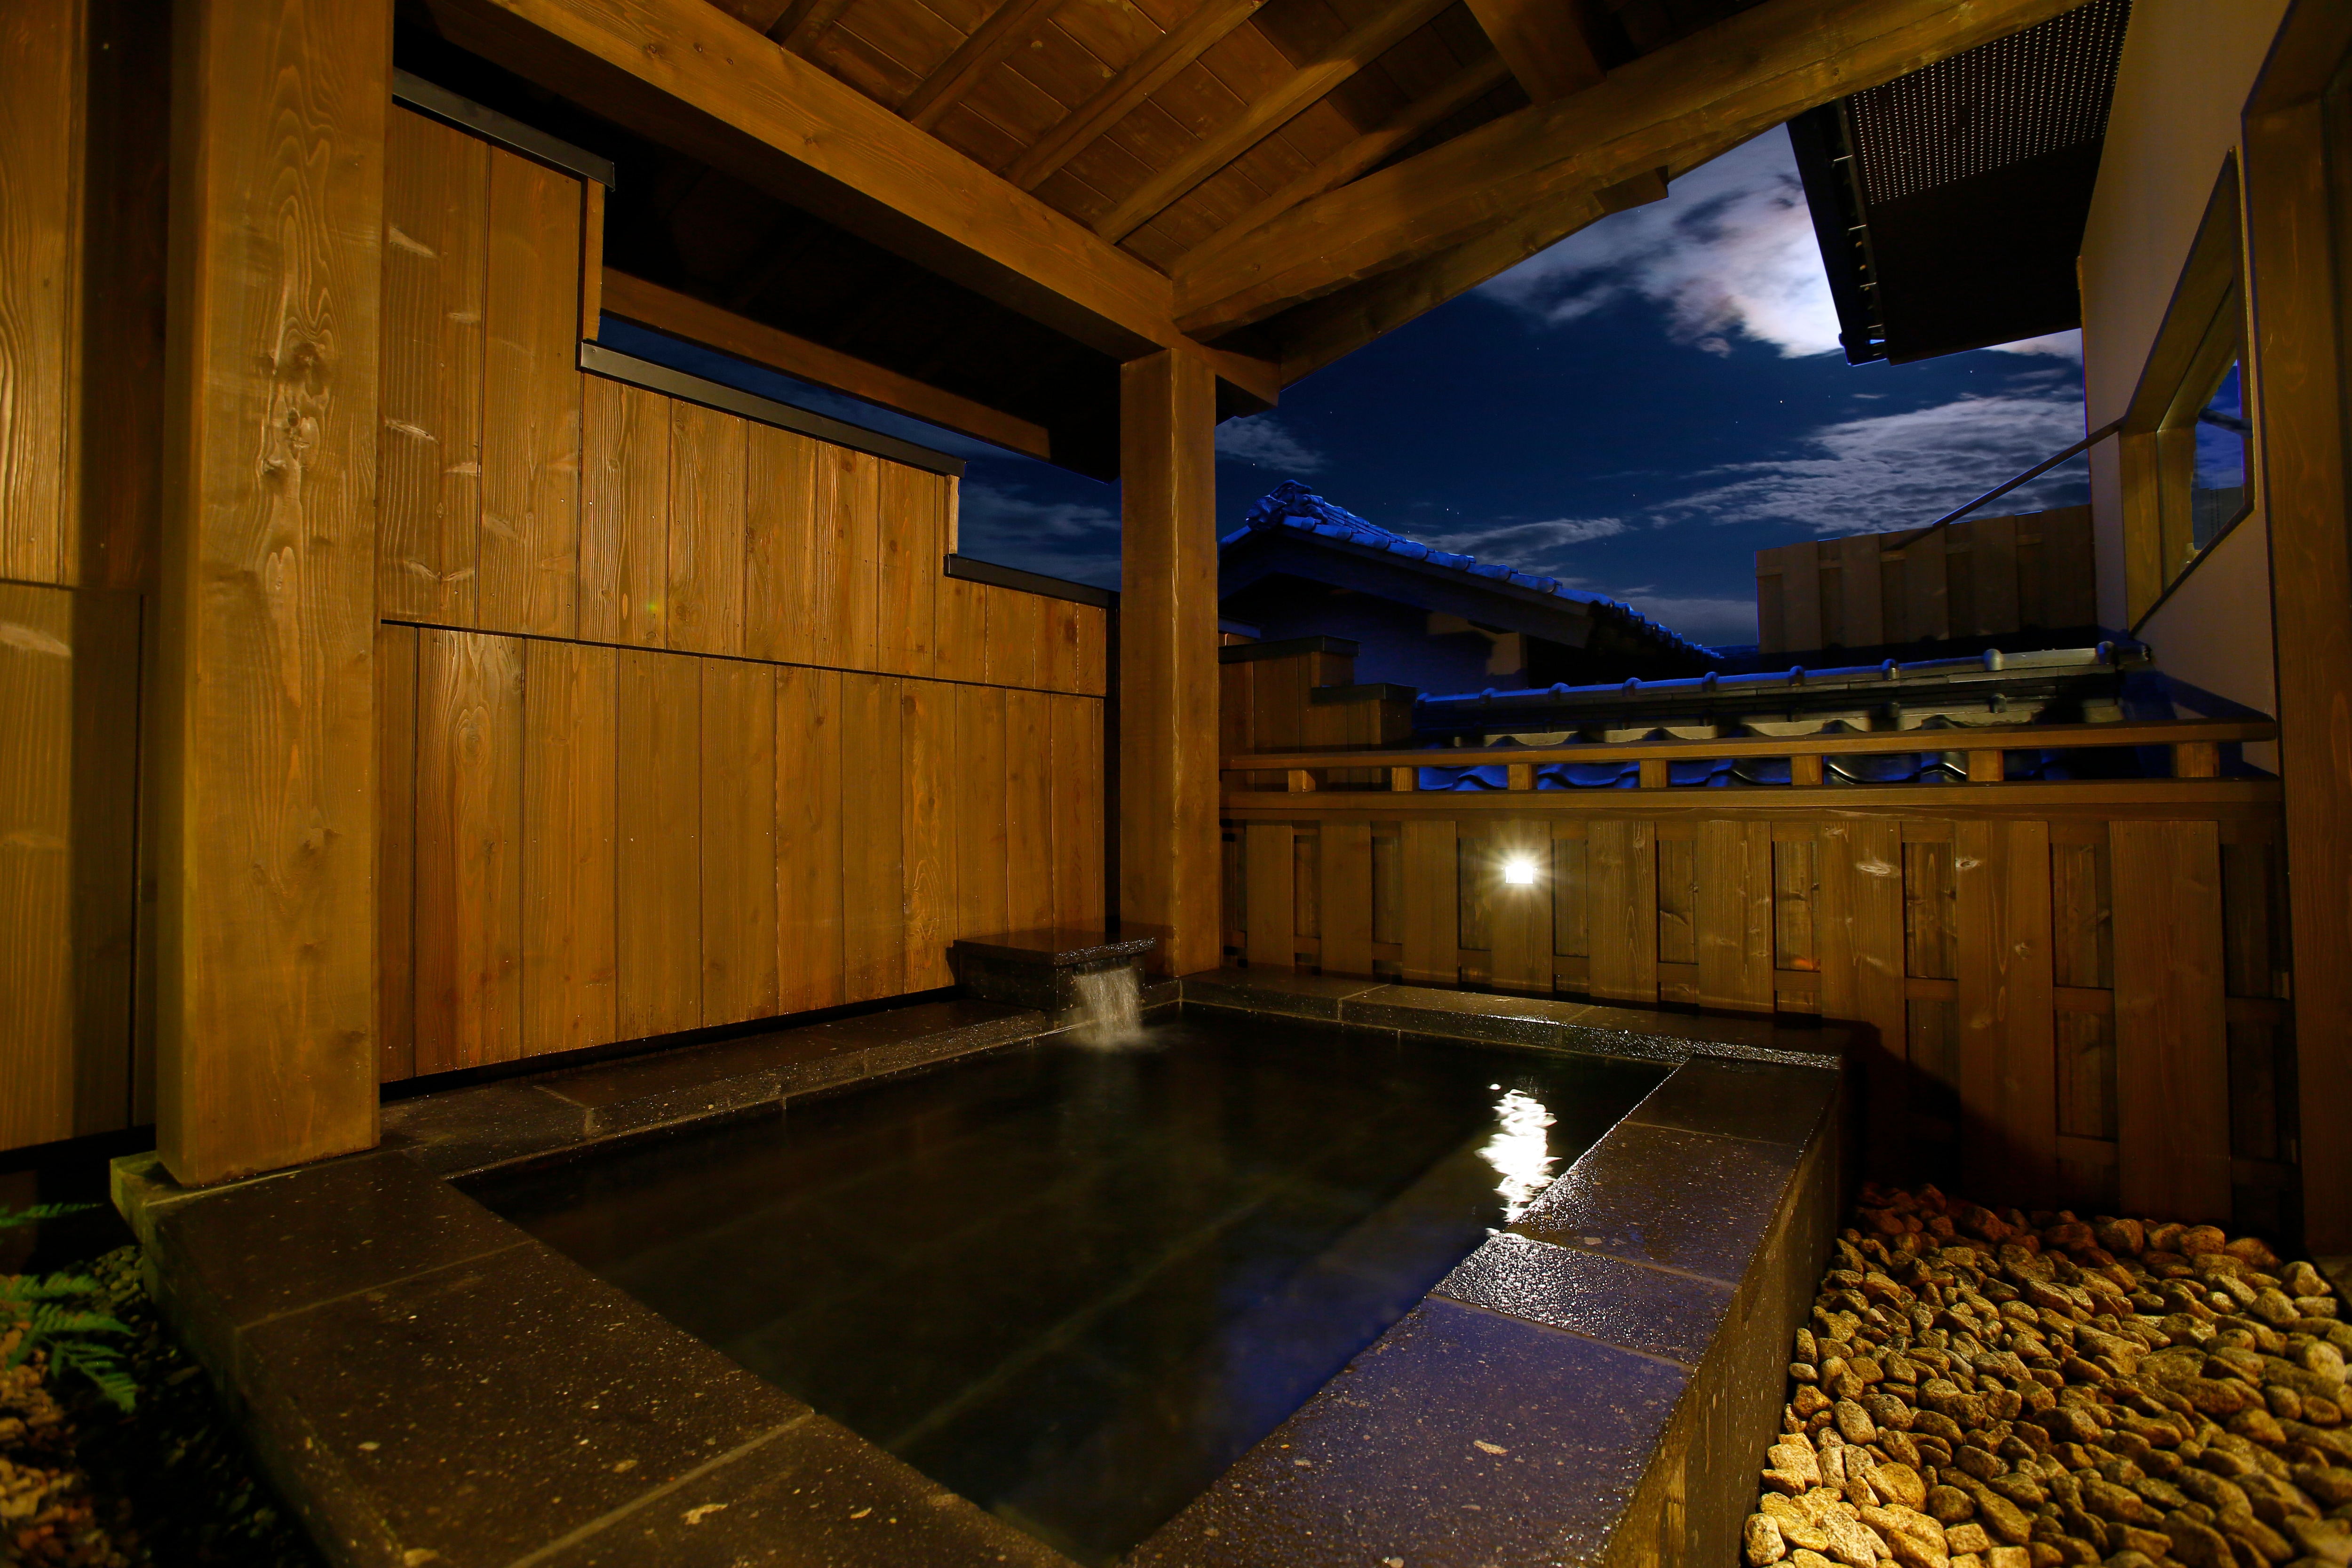 Hotel information and reservations for Aso Uchinomaki Onsen